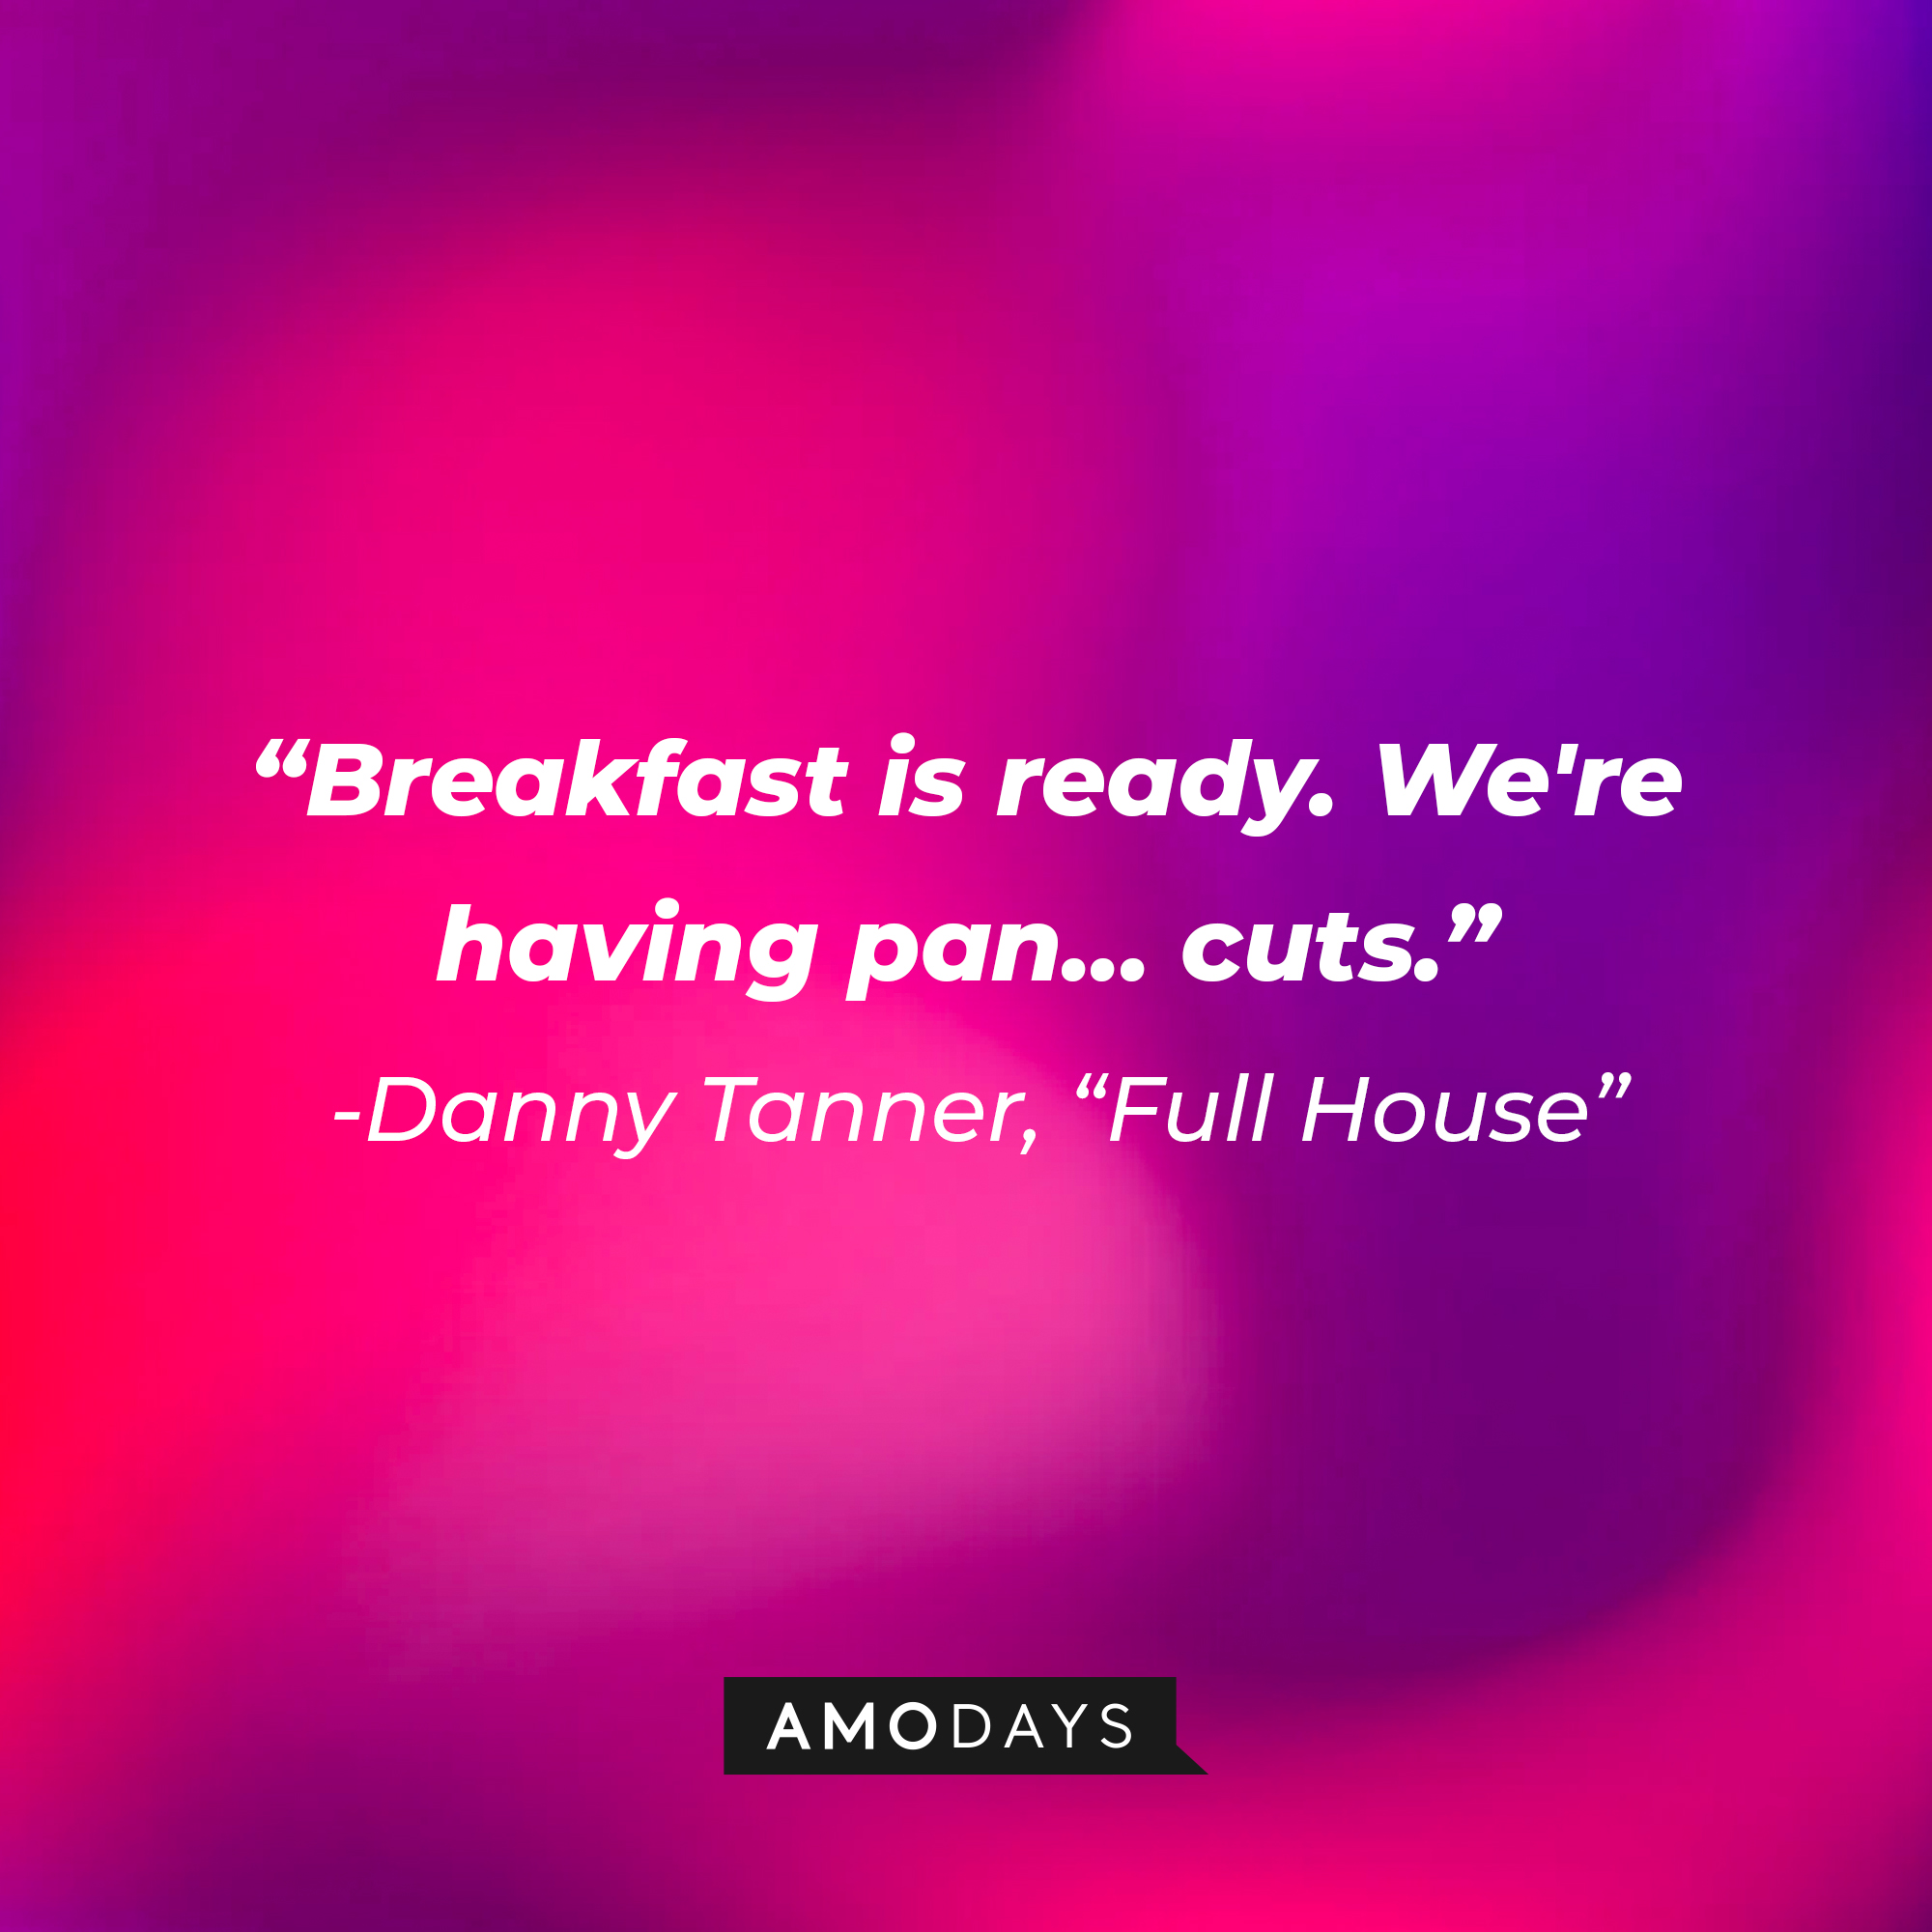 Danny Tanner's quote from "Full House" : "Breakfast is ready. We're having pan...cuts" | Source: facebook.com/FullHouseTVshow